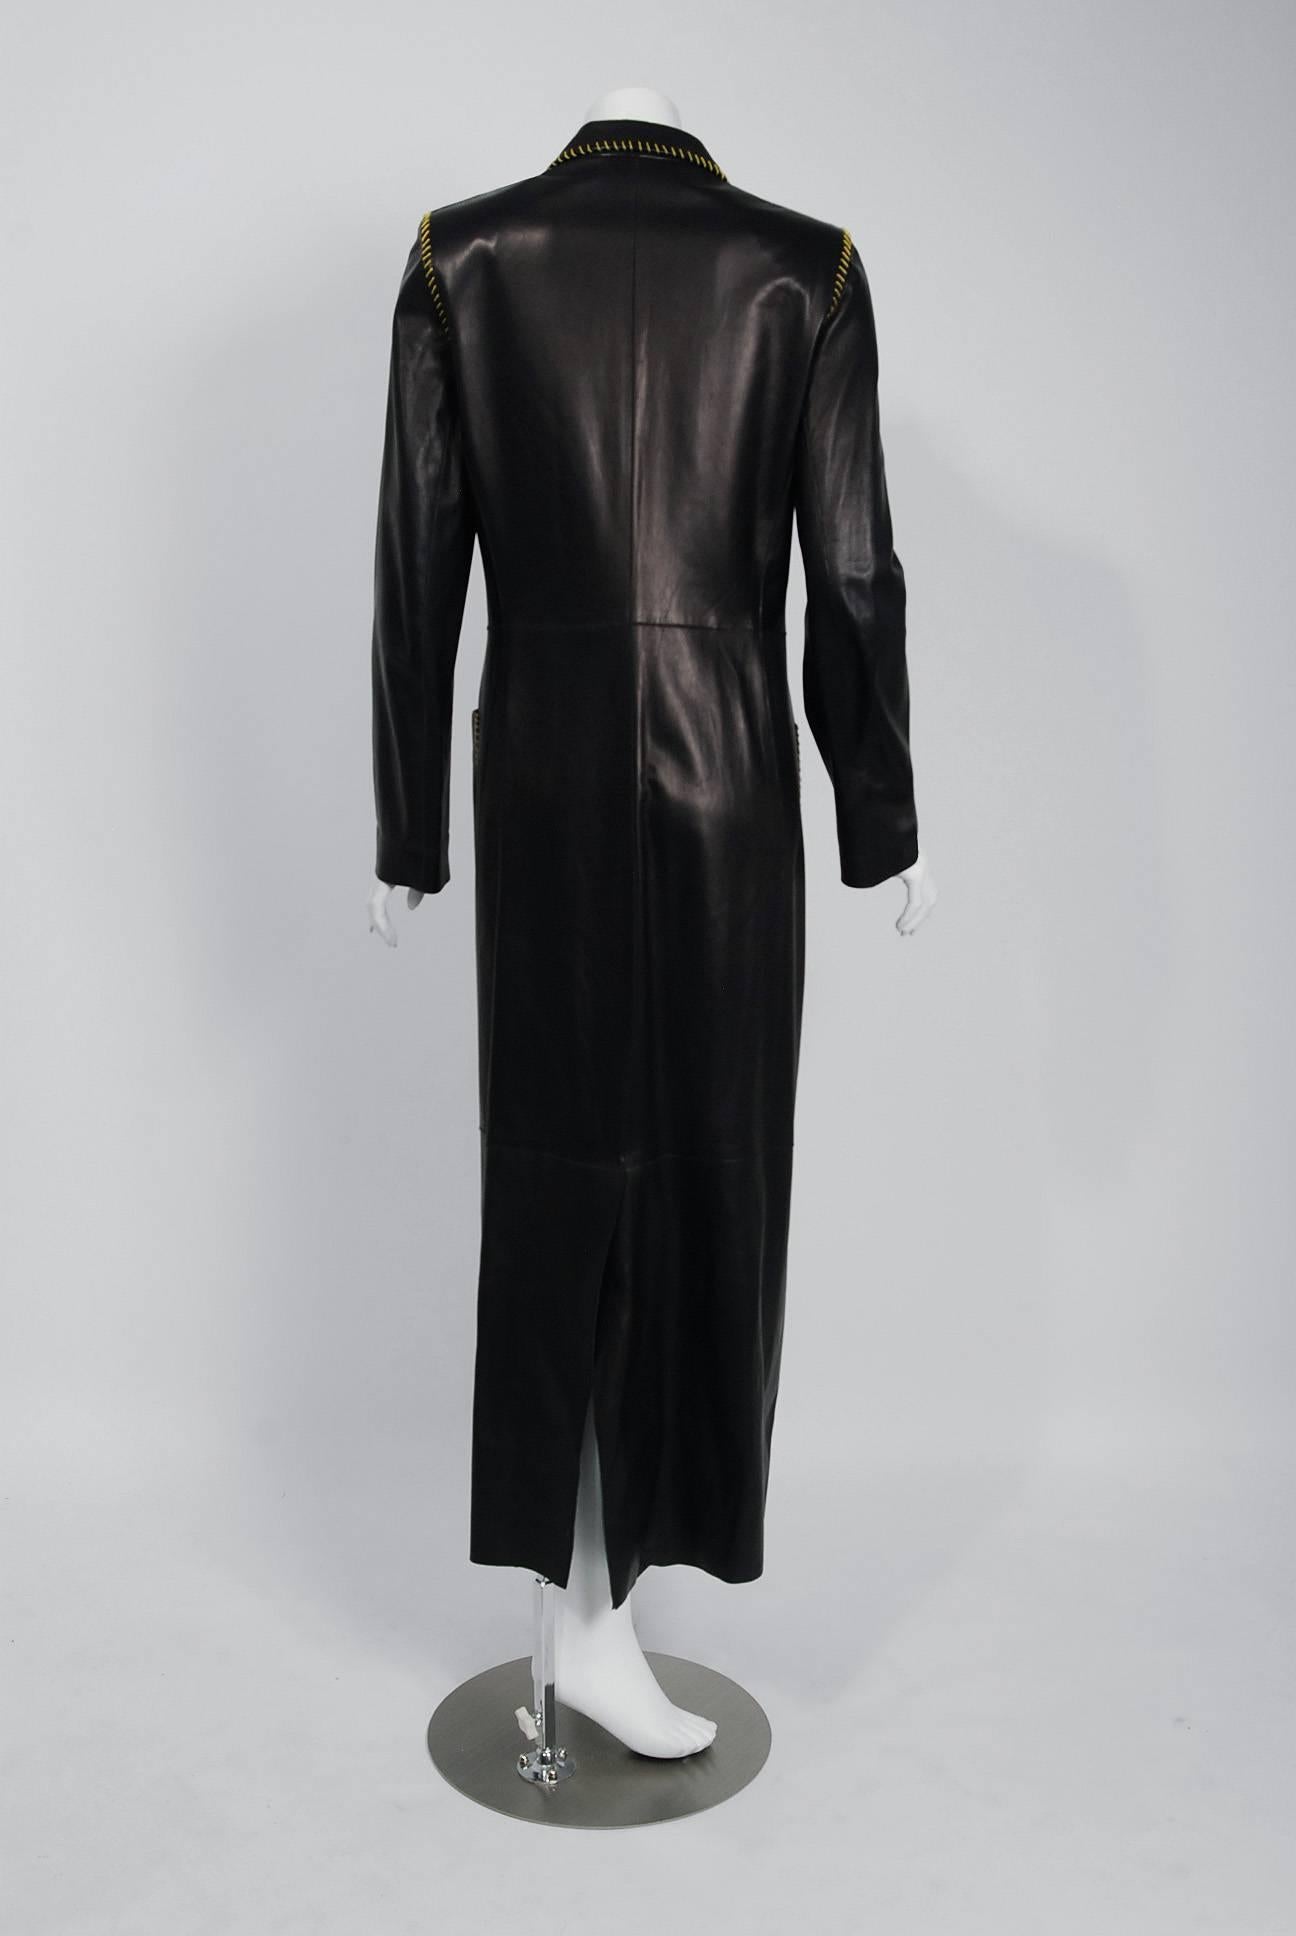 Alexander McQueen for Givenchy Runway Whipstitch Black Leather Trench Coat, 2000 1